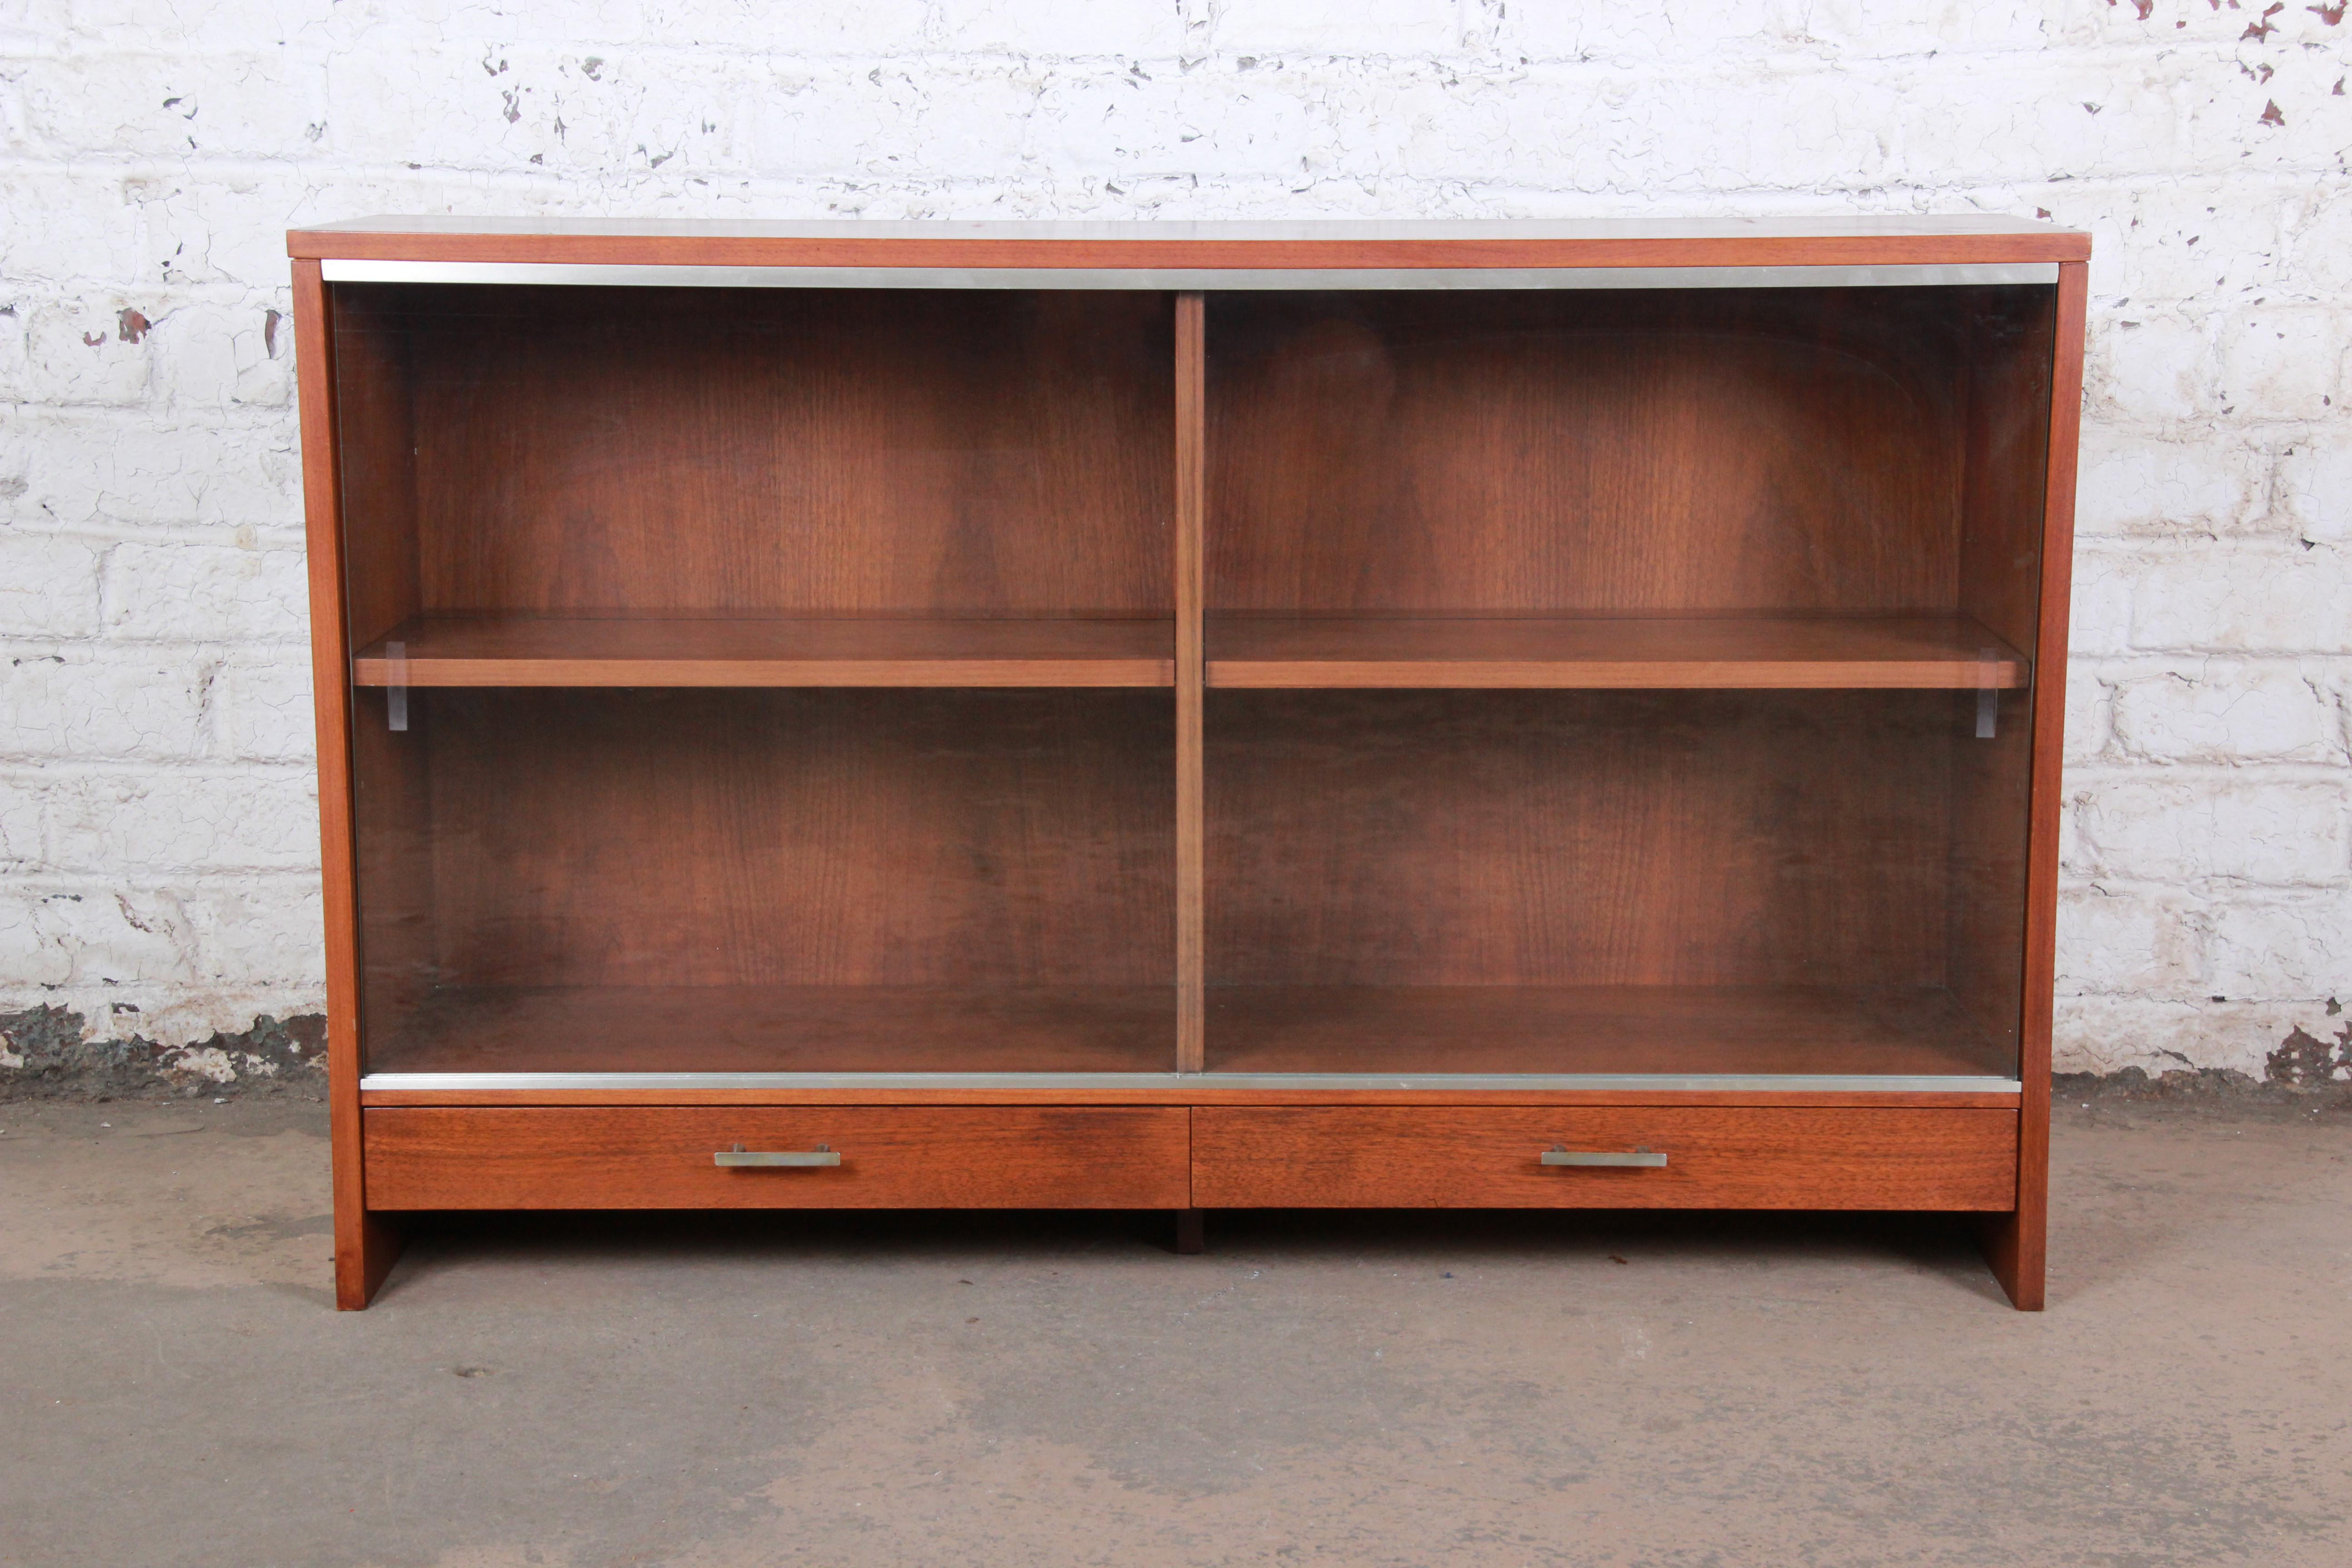 A sleek and stylish Mid-Century Modern glass front display cabinet or bookcase designed by Paul McCobb for Calvin furniture. The bookcase features beautiful walnut wood grain, with aluminum trim and hardware. It offers good storage, with two